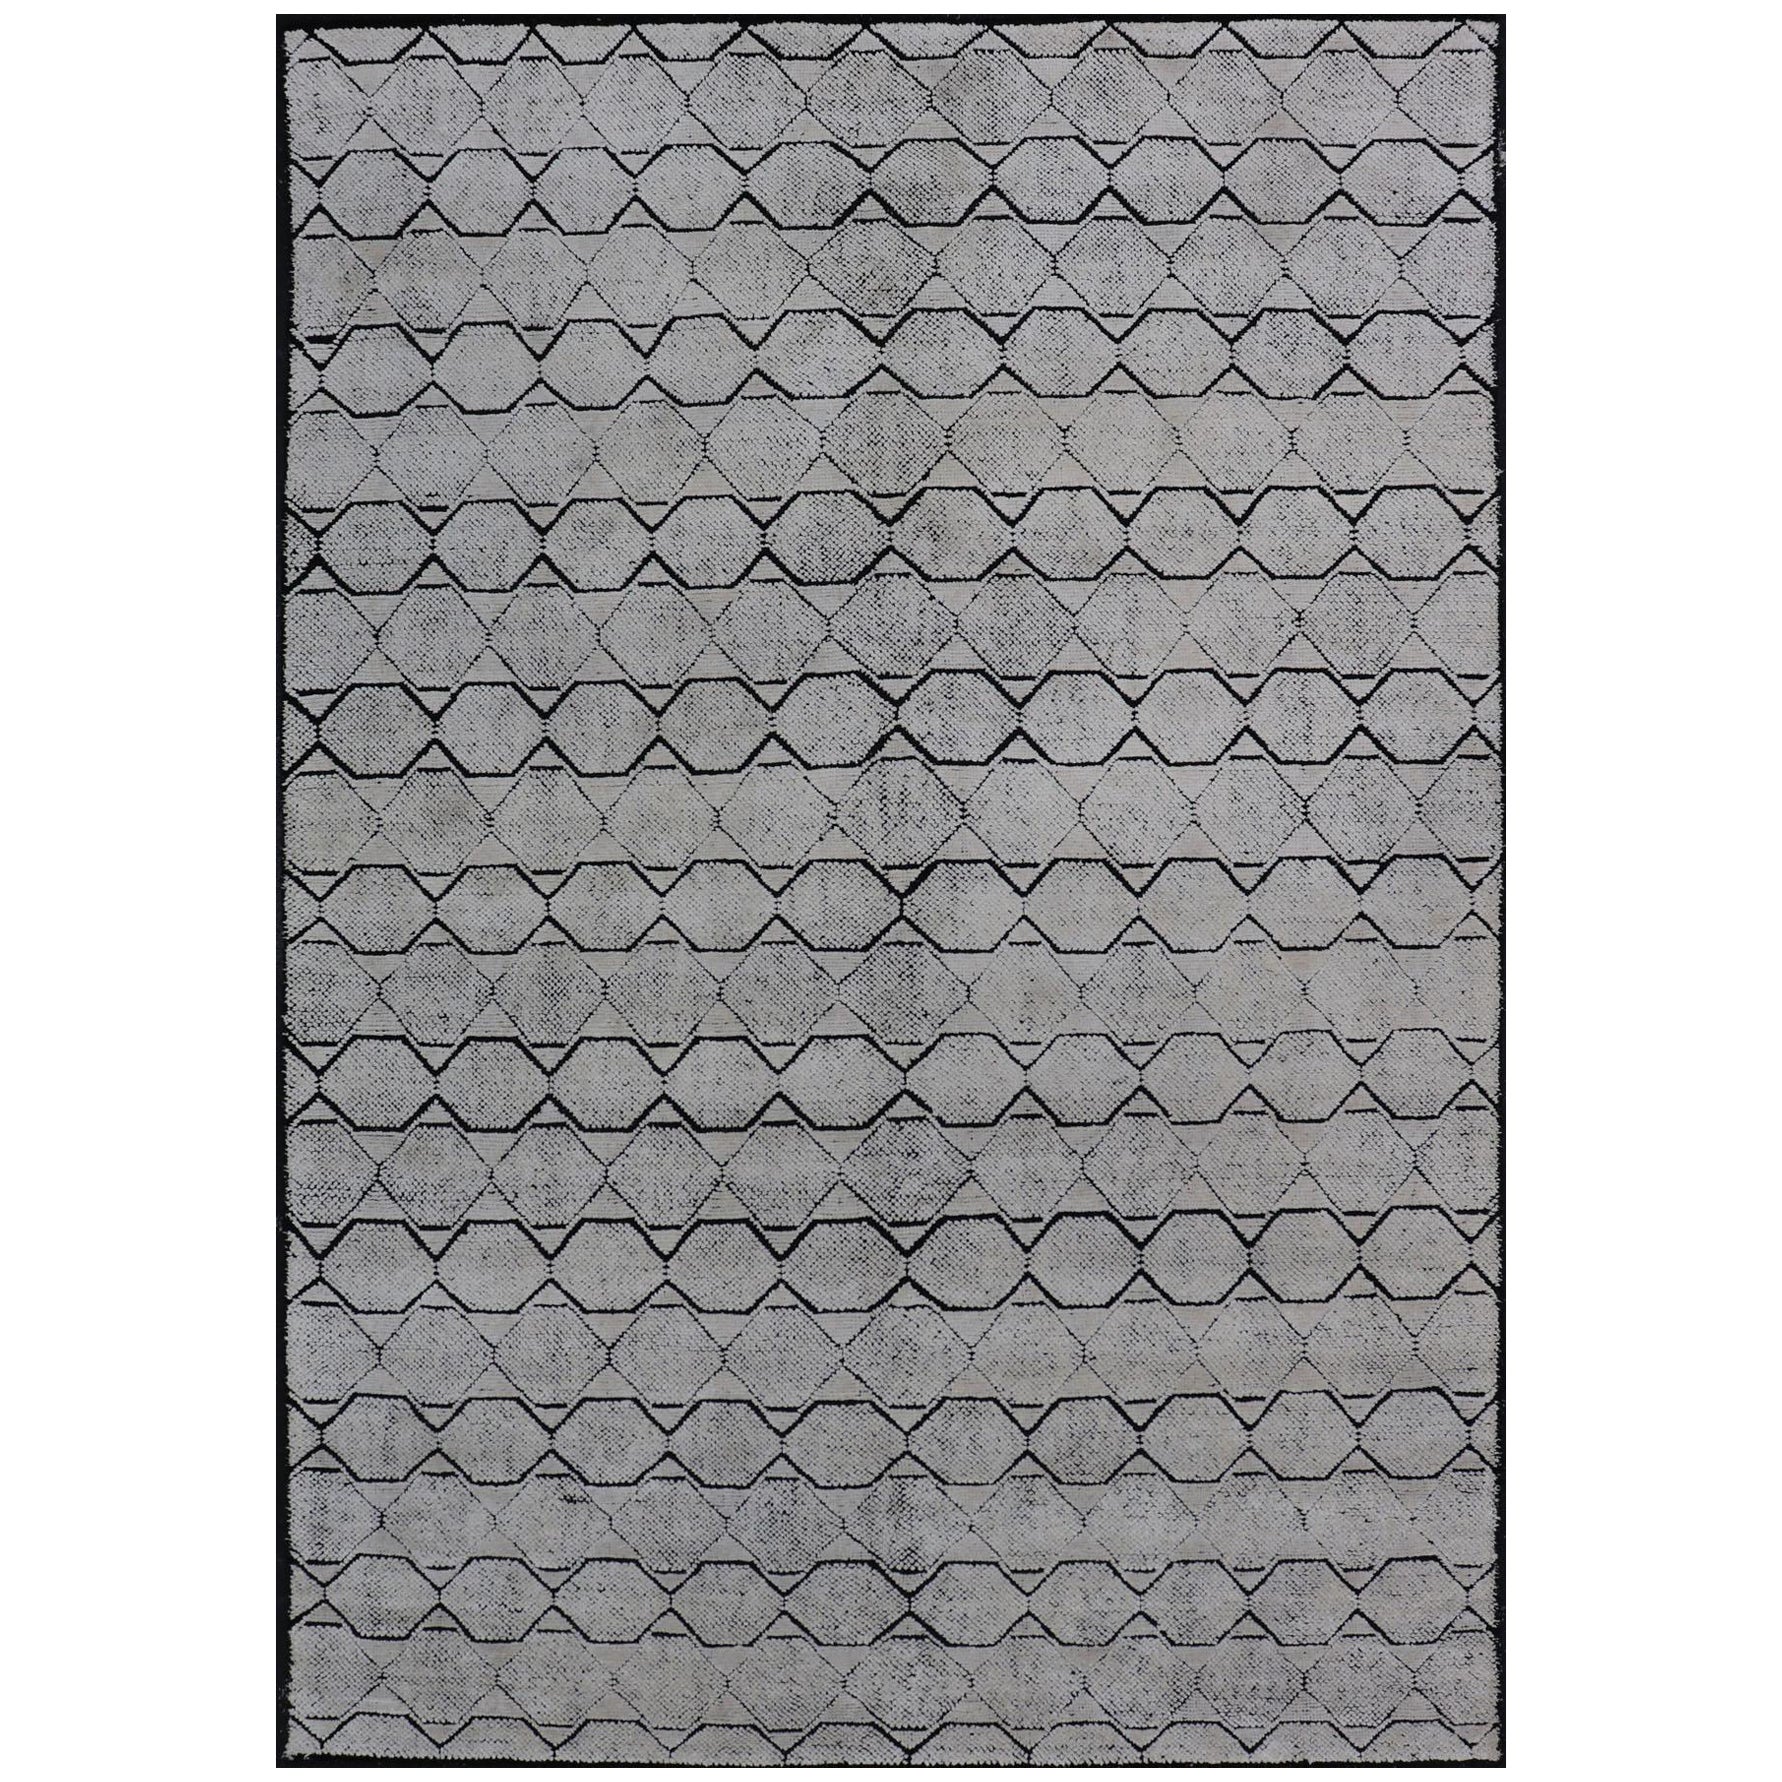 Indian Modern Geometric & Minimal Design Area Rug in Ivory and Black For Sale